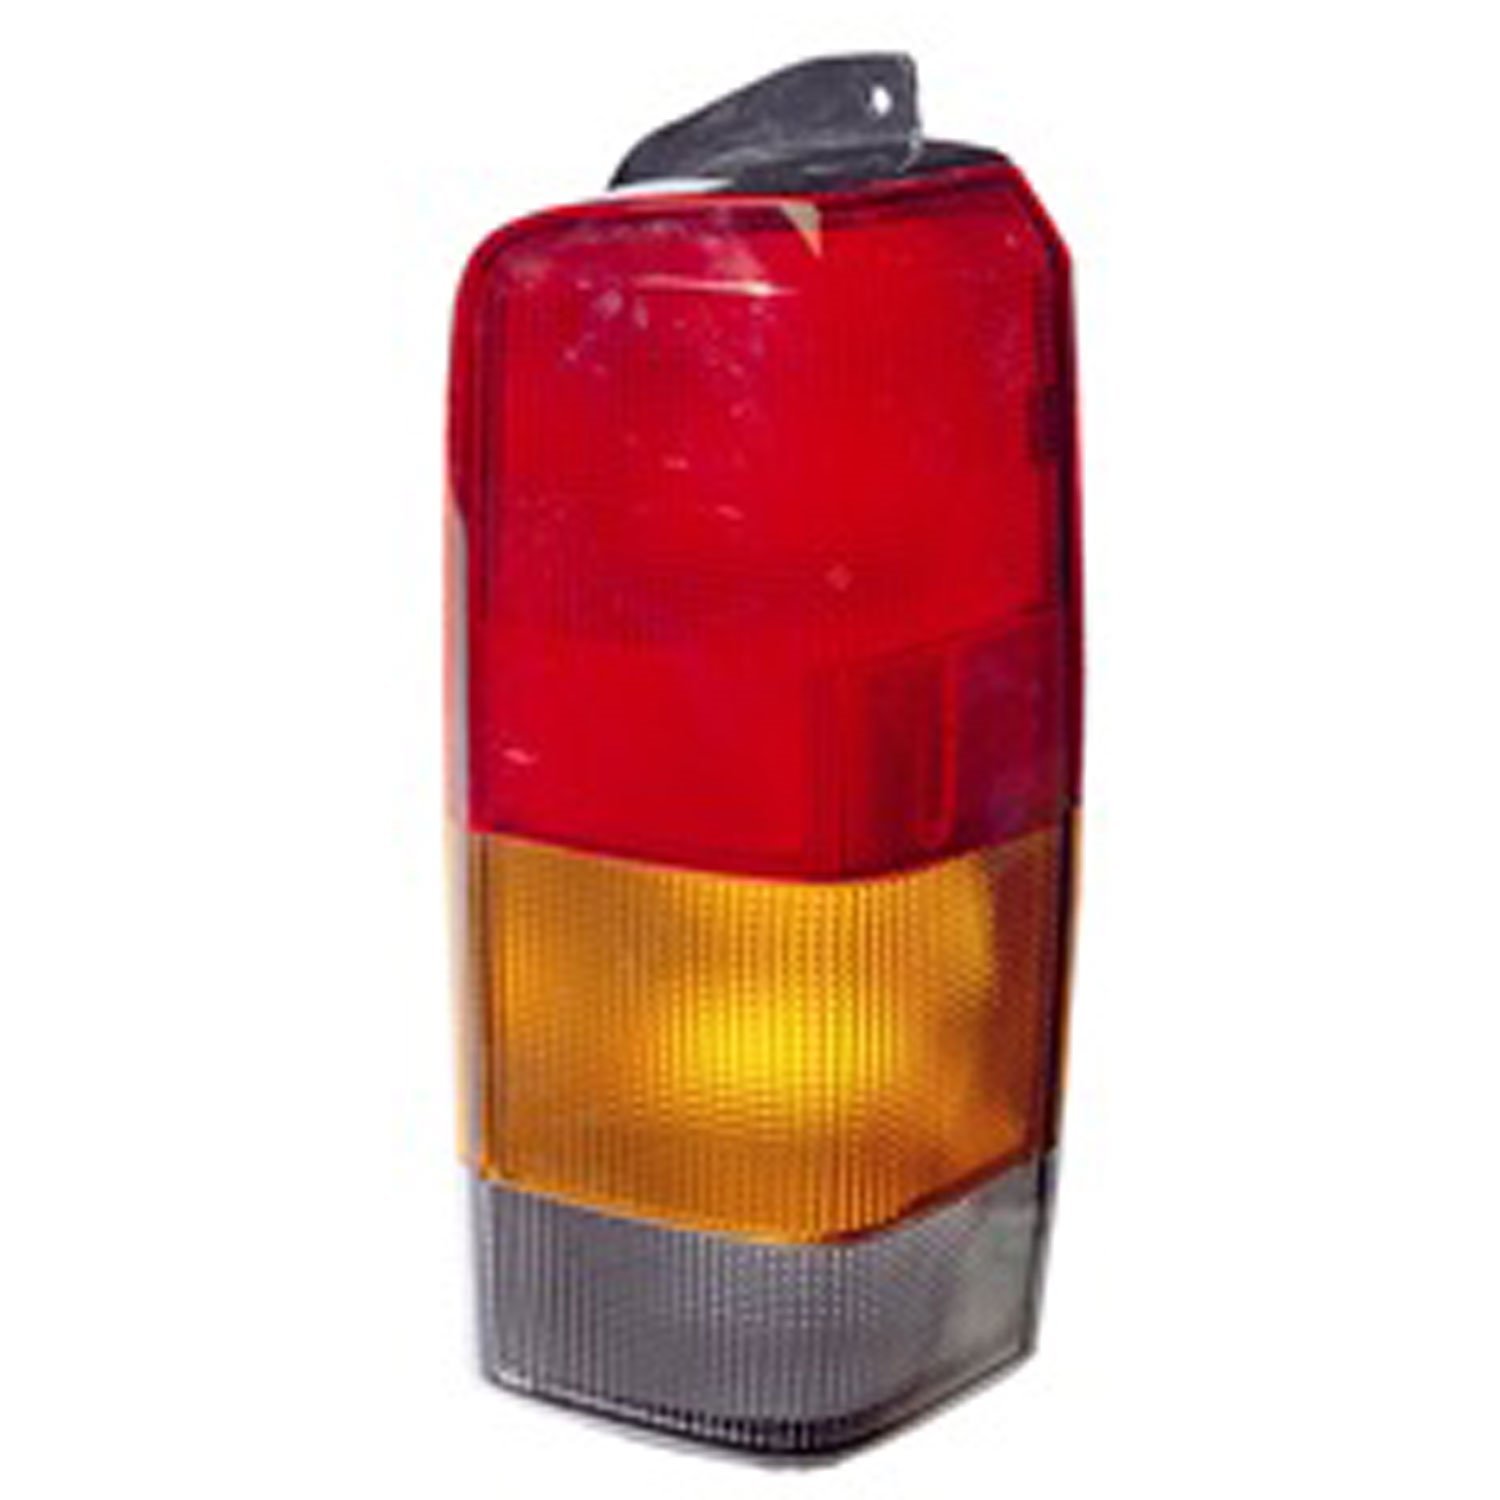 Replacement tail light assembly from Omix-ADA, Fits right side of 97-01 Jeep Cherokee XJ